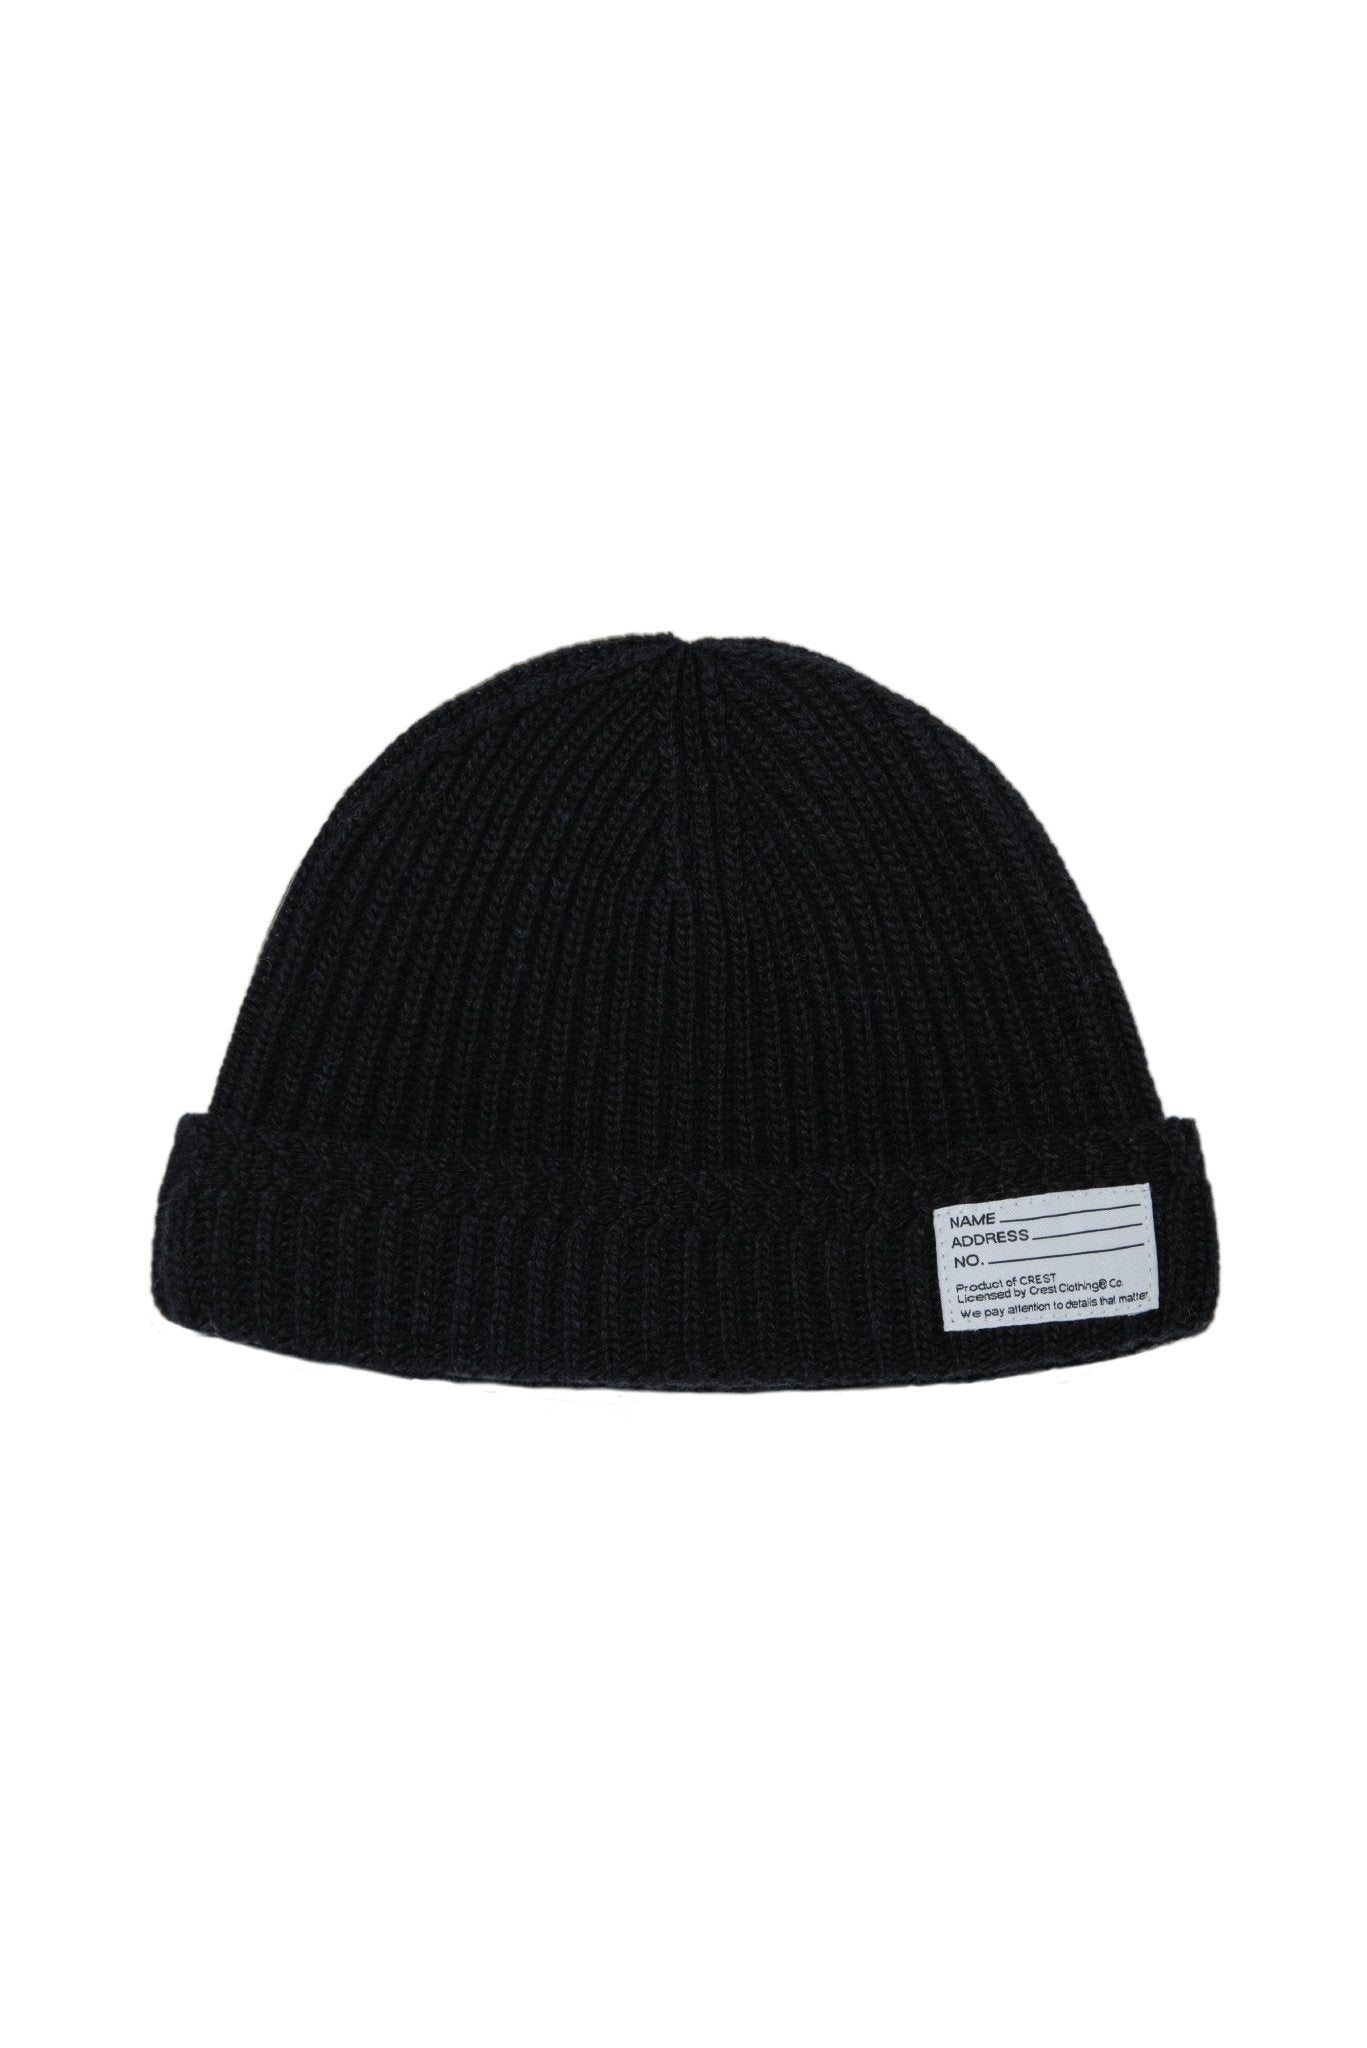 CREST - Name Patch Beanie